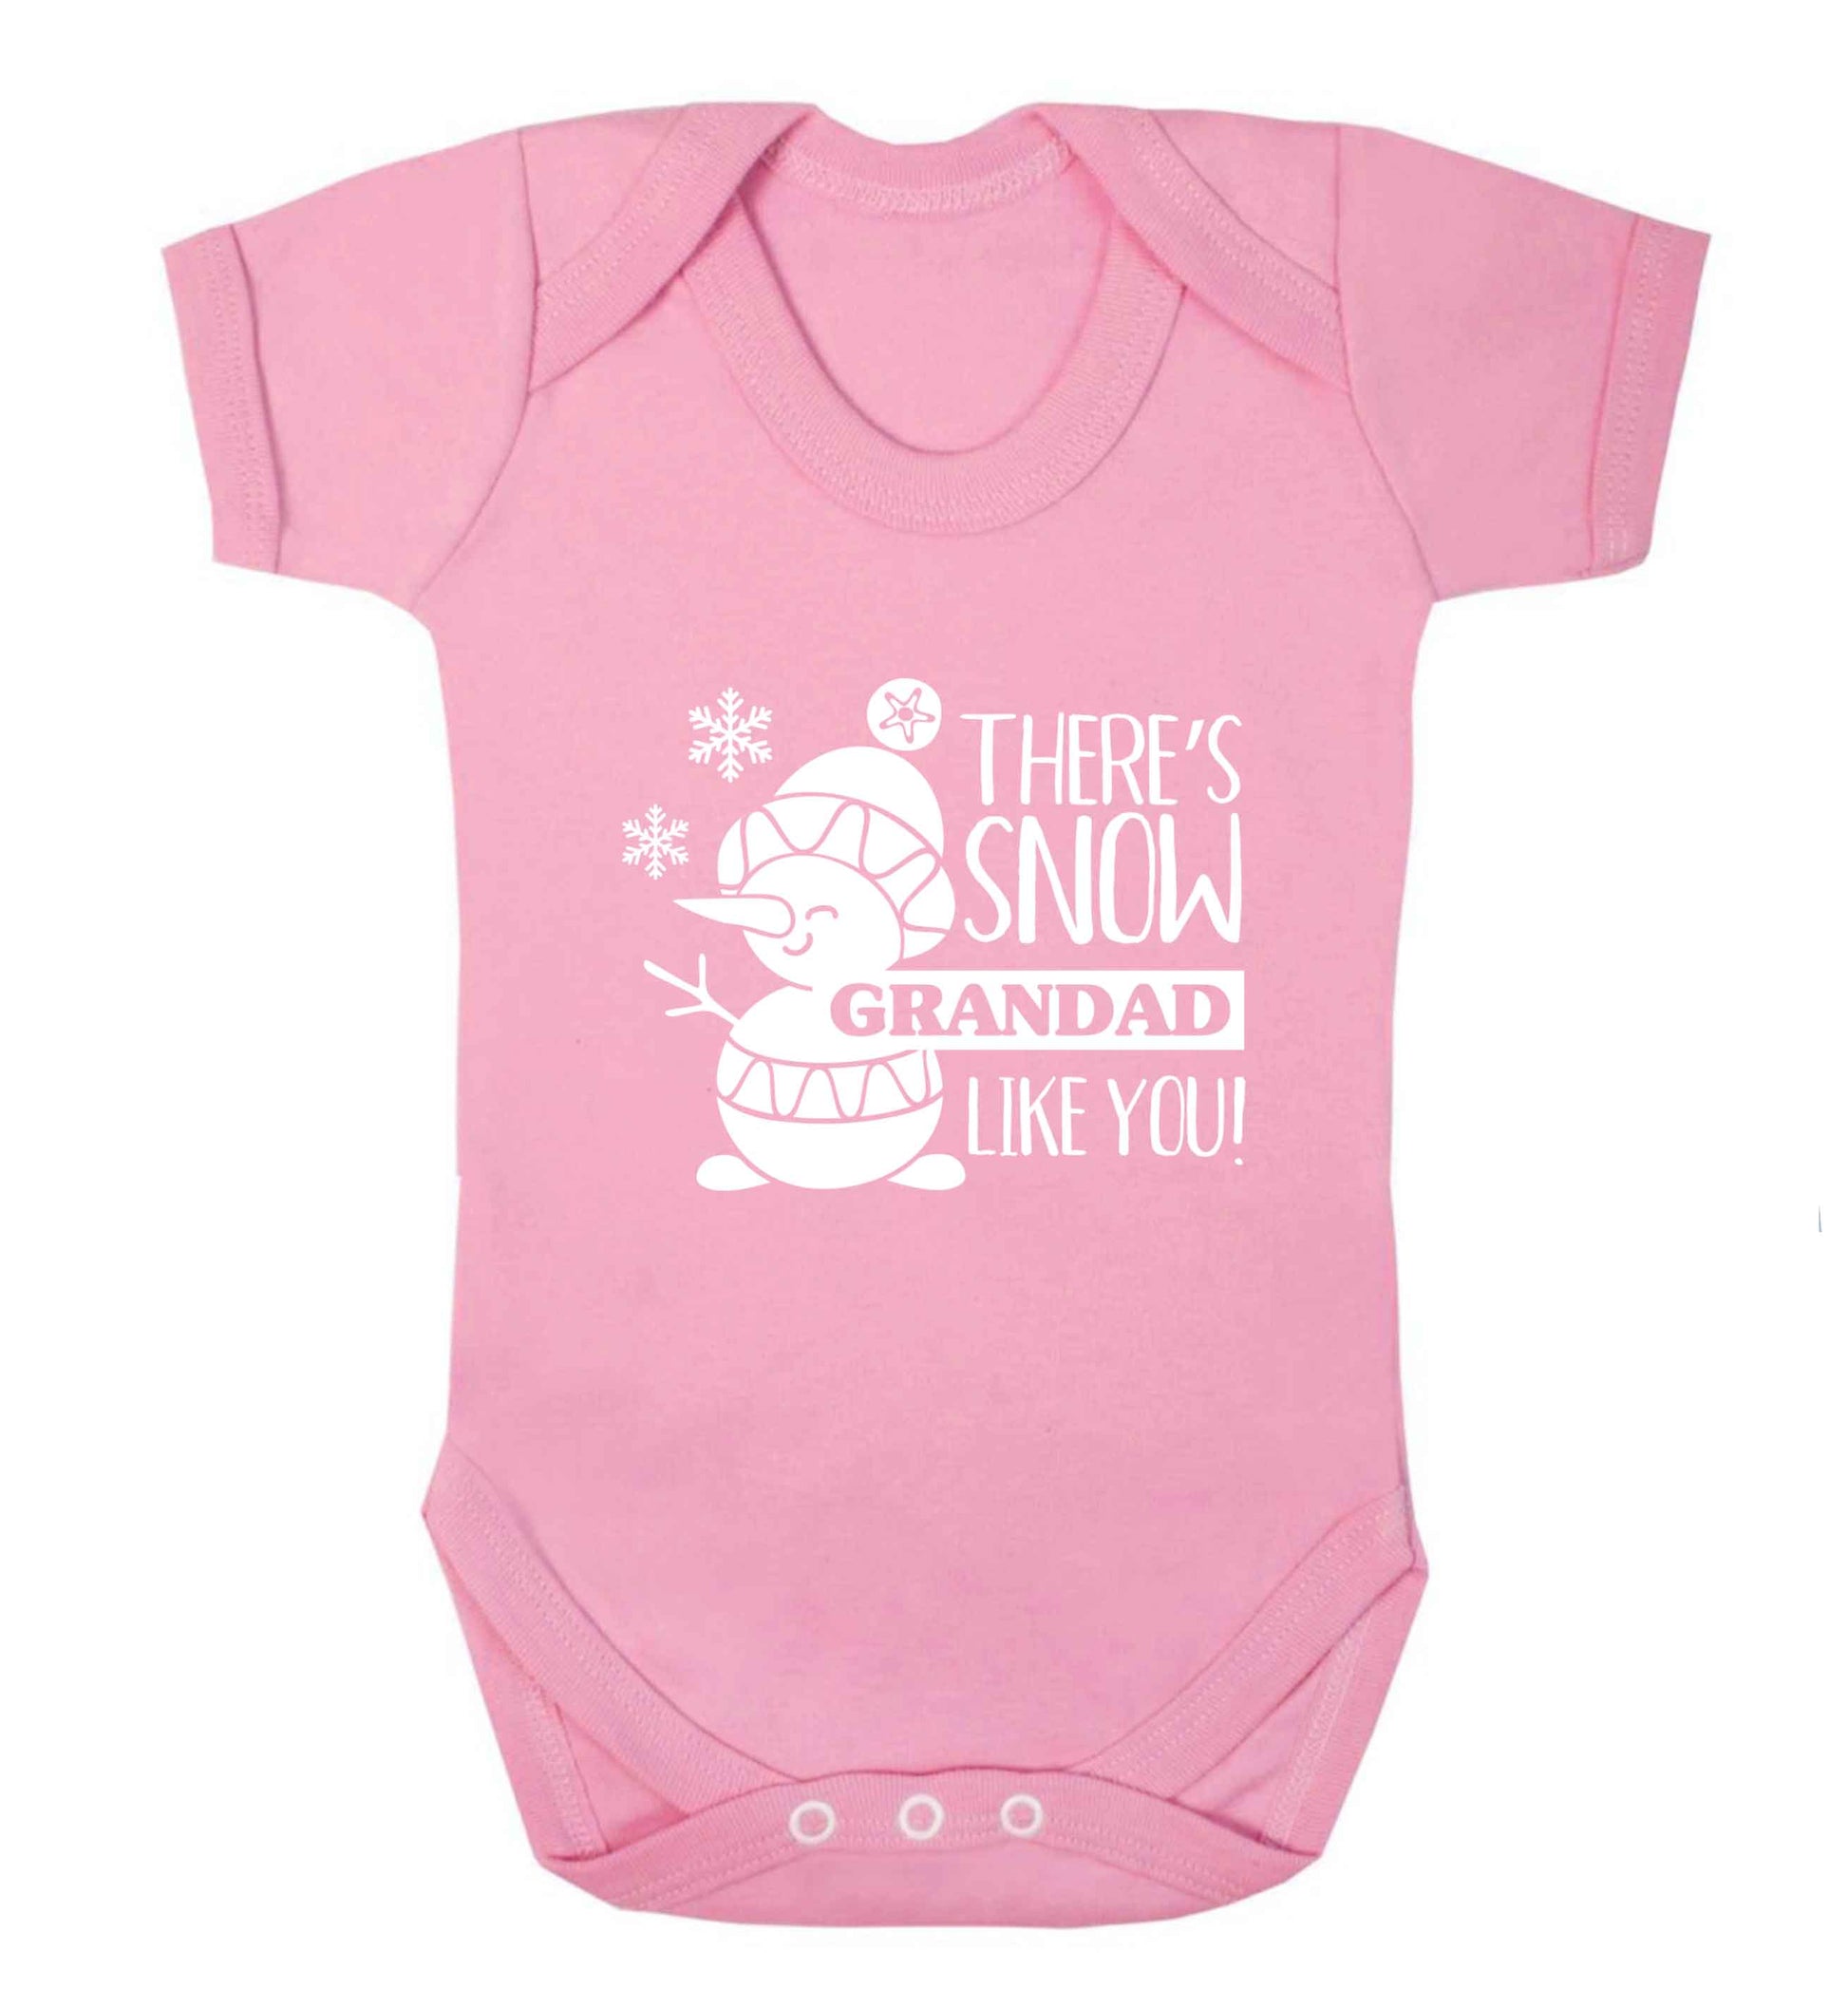 There's snow grandad like you baby vest pale pink 18-24 months